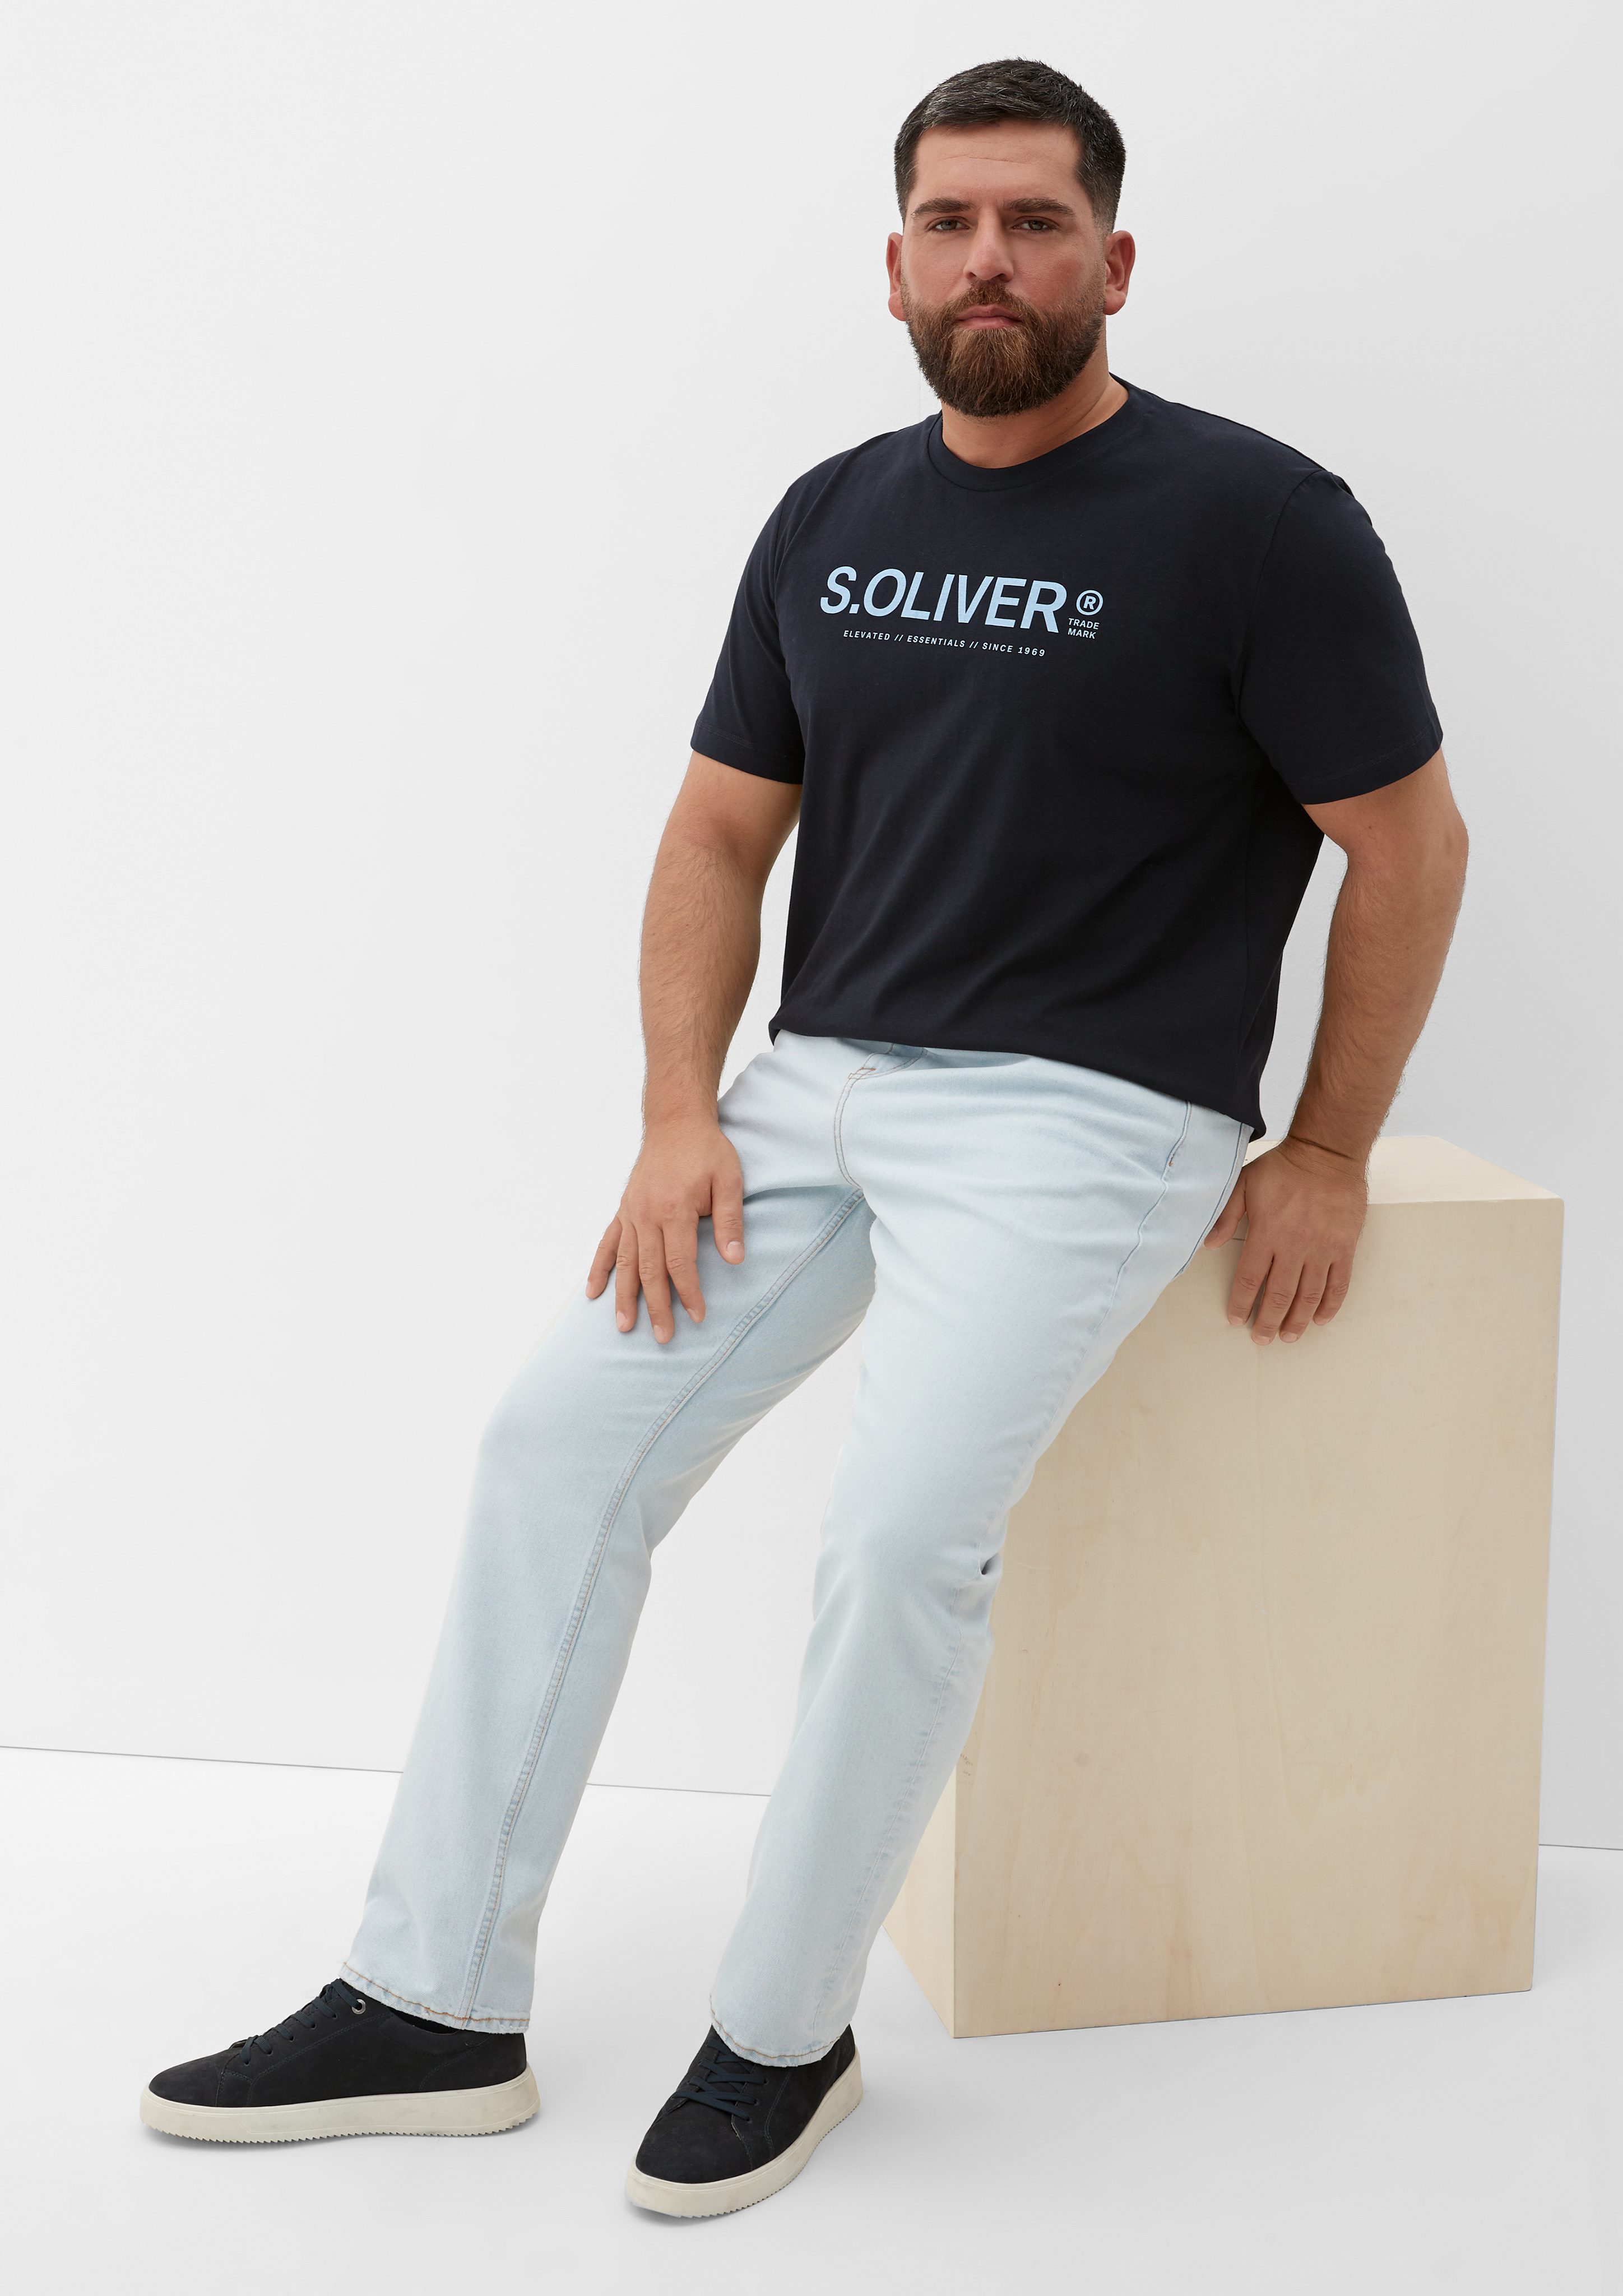 s.Oliver Stoffhose Jeans Casby / Relaxed Fit / Mid Rise / Straight Leg Leder-Patch, Kontrastnähte, Waschung hellblau